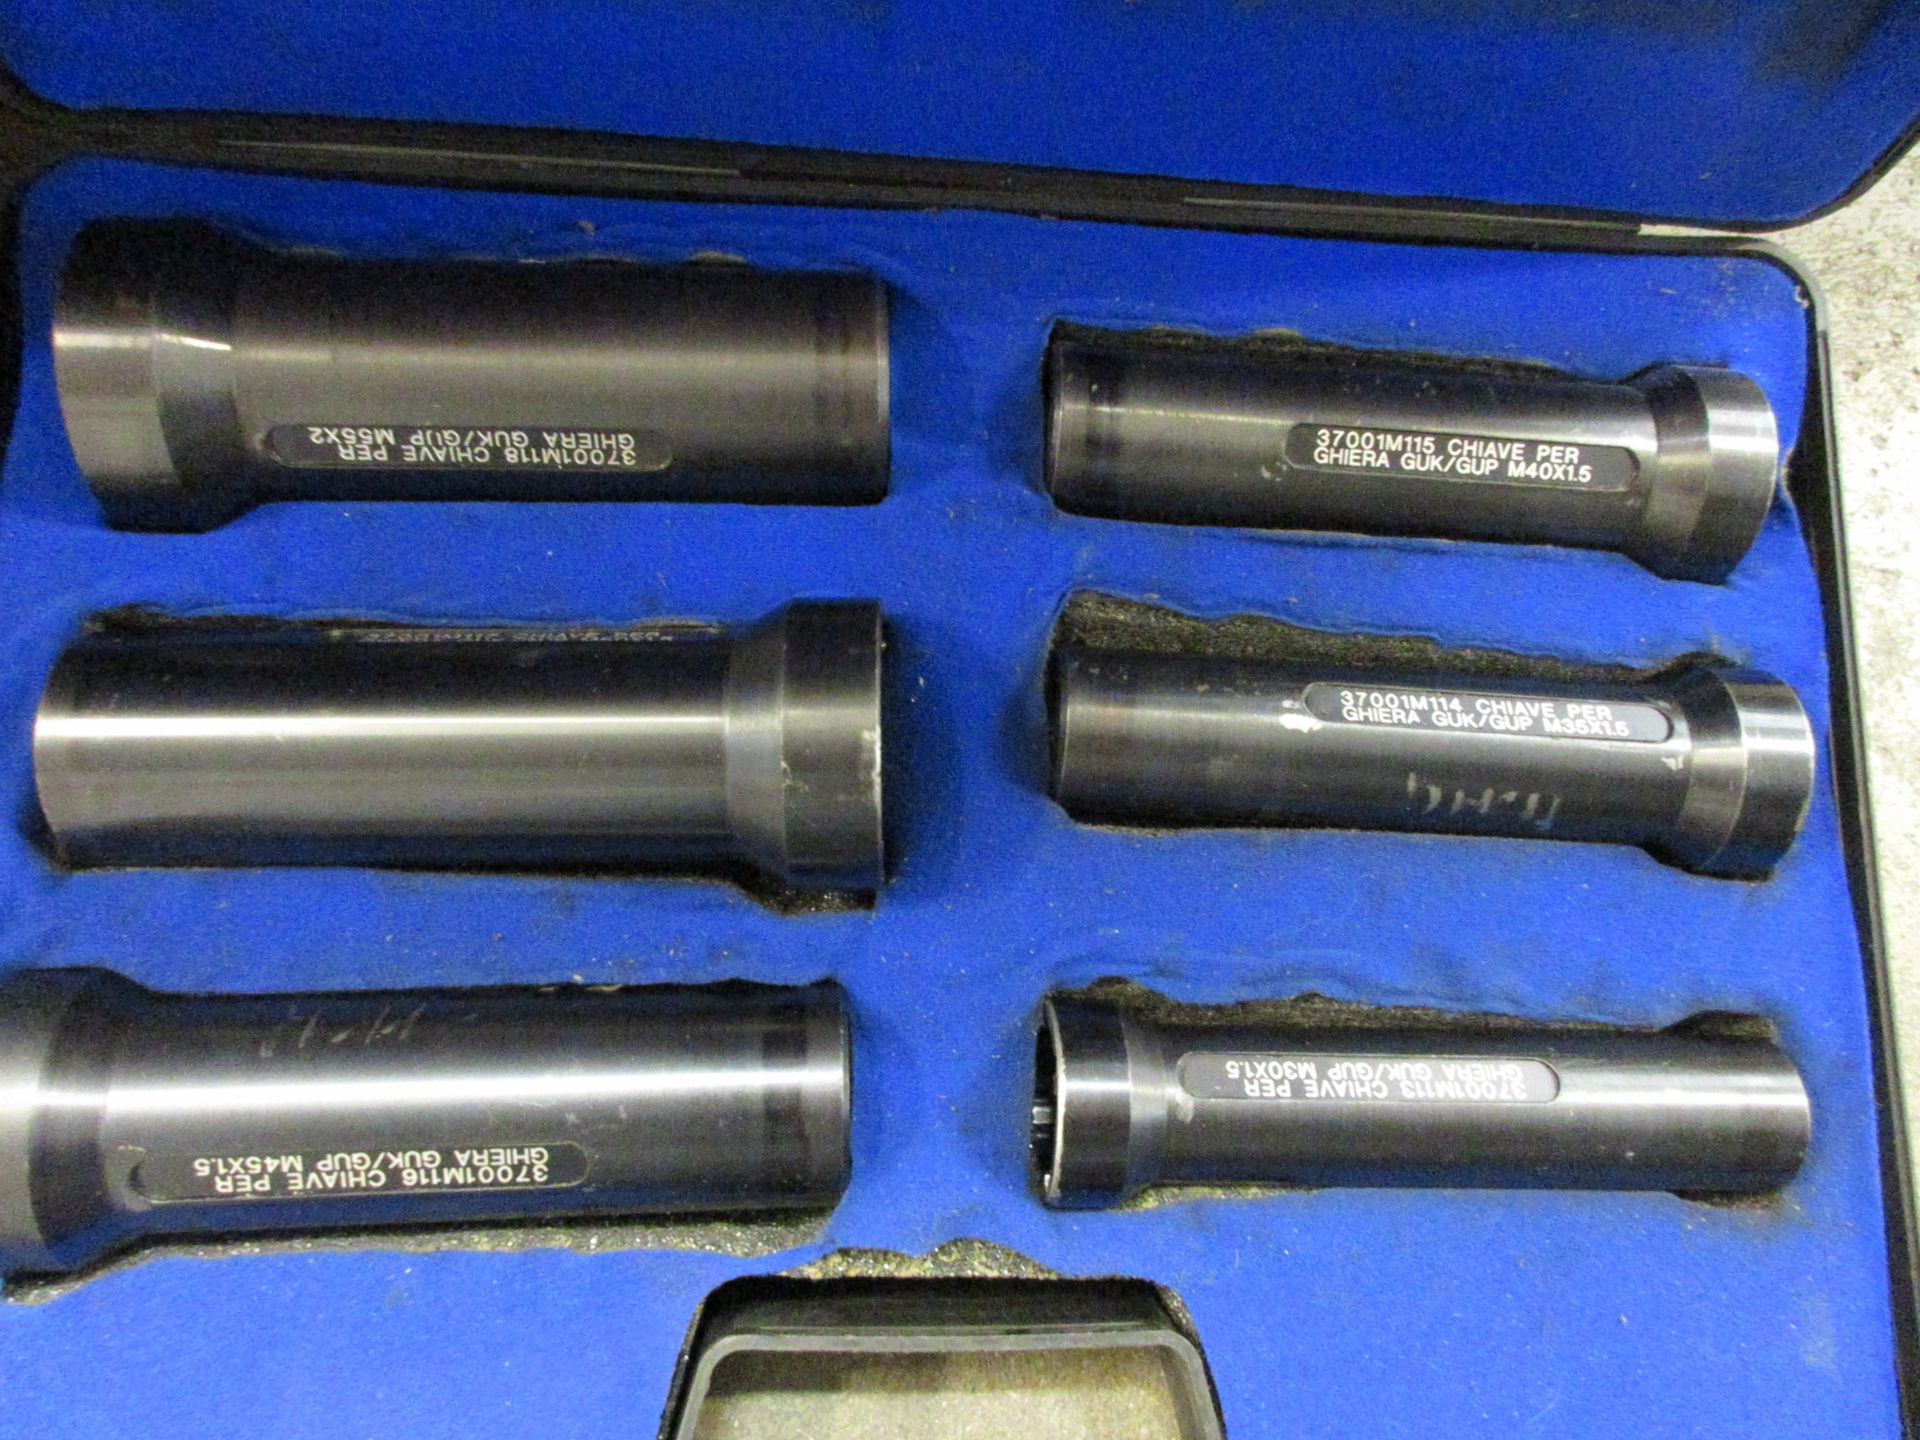 Full and part set of Chiave Par Ghiera Guk/Gup insert keys for locking nut, various sizes - Image 2 of 4